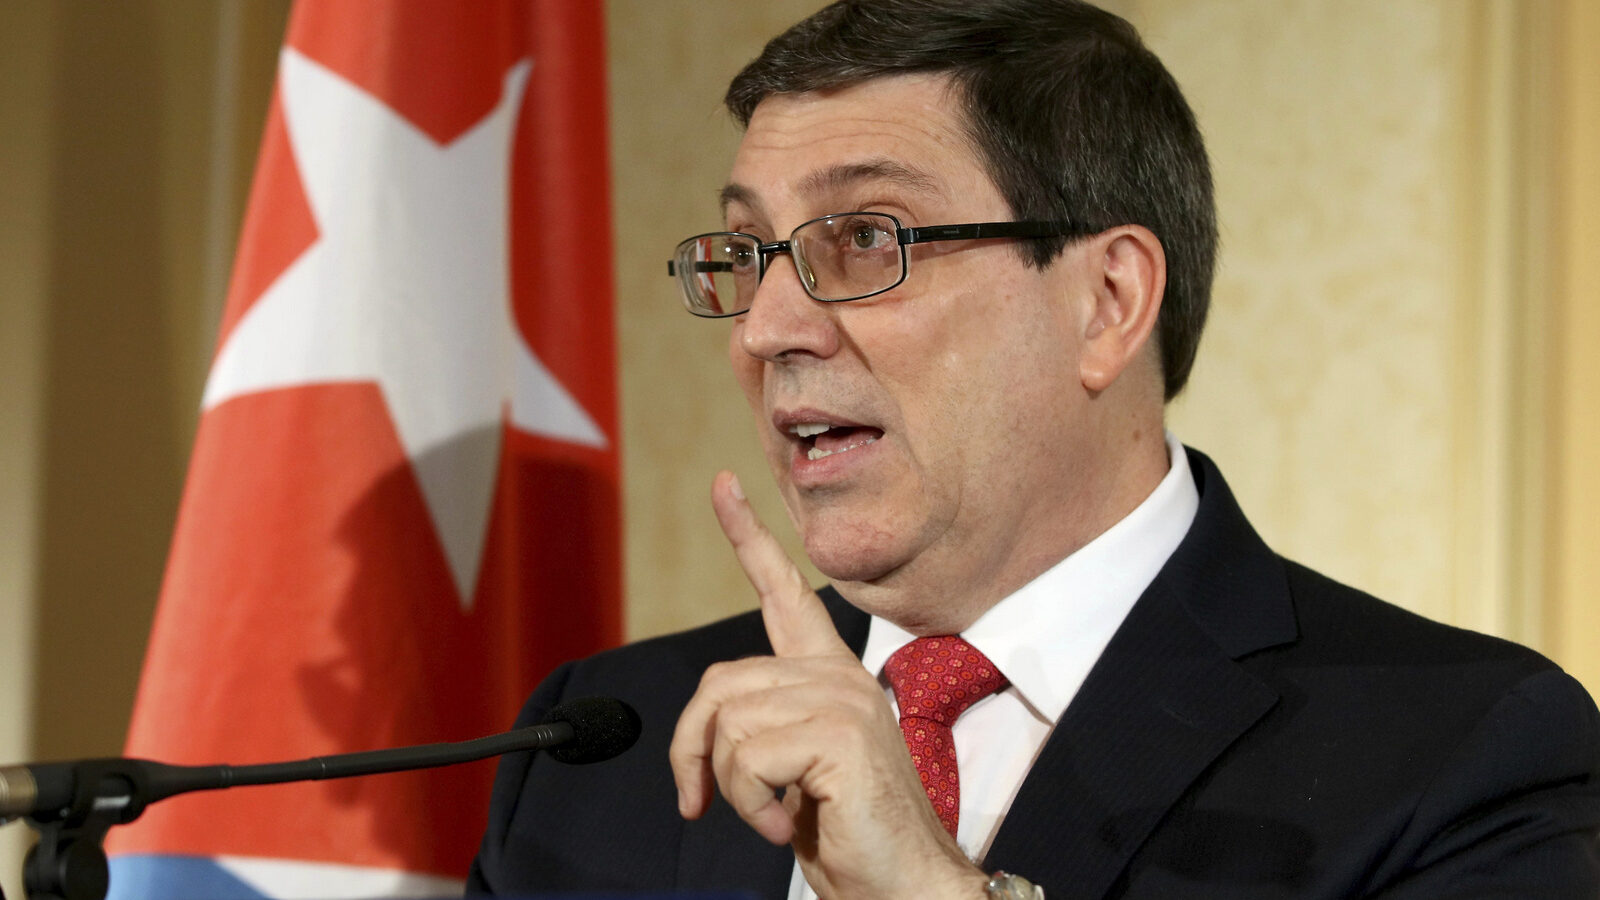 Cuban Foreign Minister Bruno Rodriguez Parilla addresses the media during a news conference in Vienna, Austria, June 19, 2017. (AP/Ronald Zak)